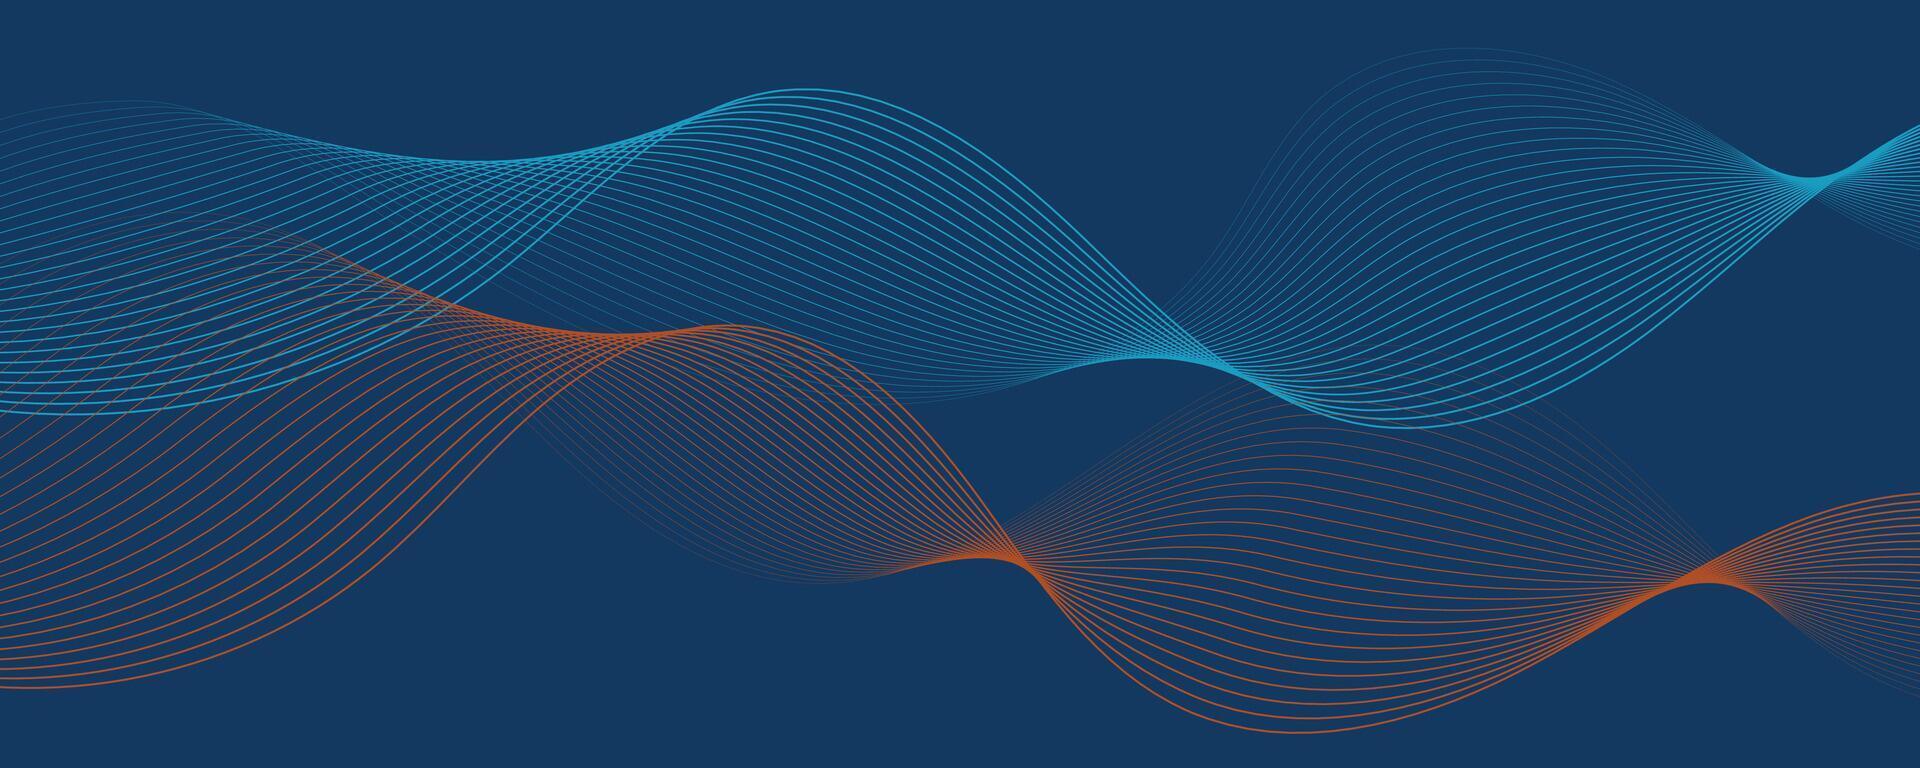 Abstract blue background with multicolored orange wavy lines vector